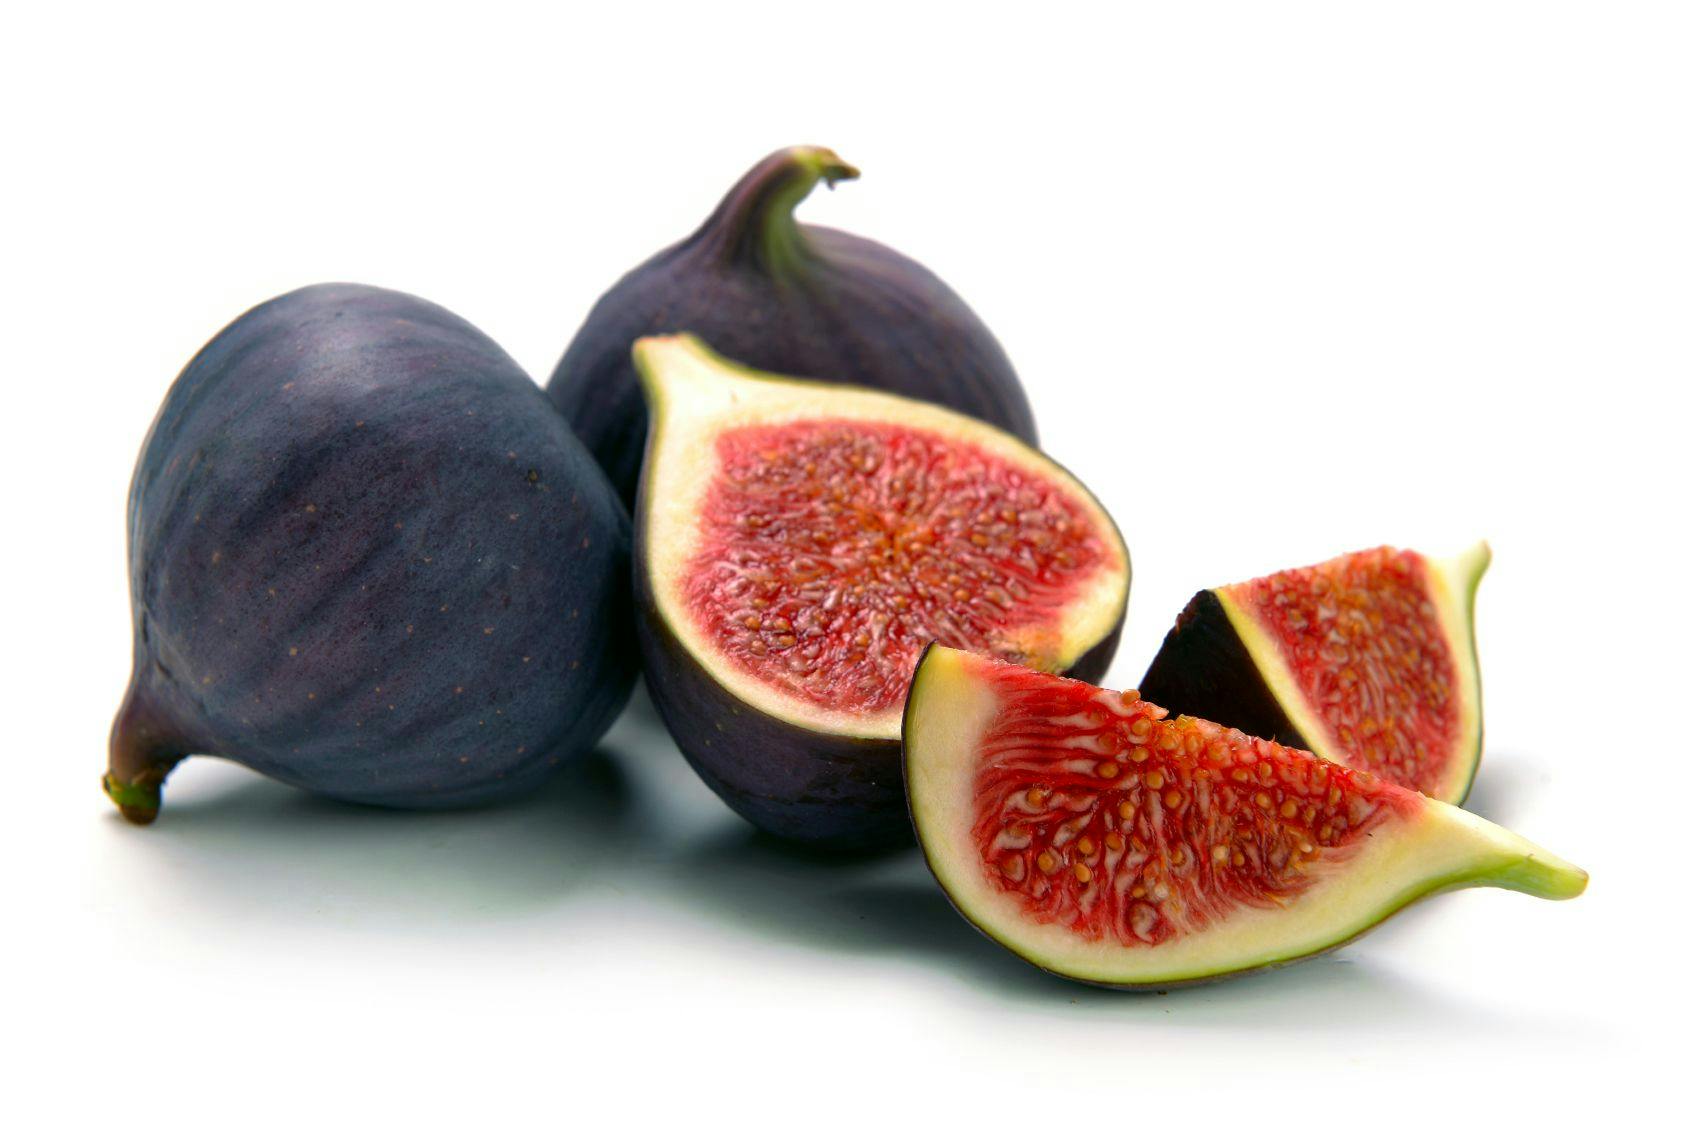 Figs Have Nutritional and Medicinal Potential